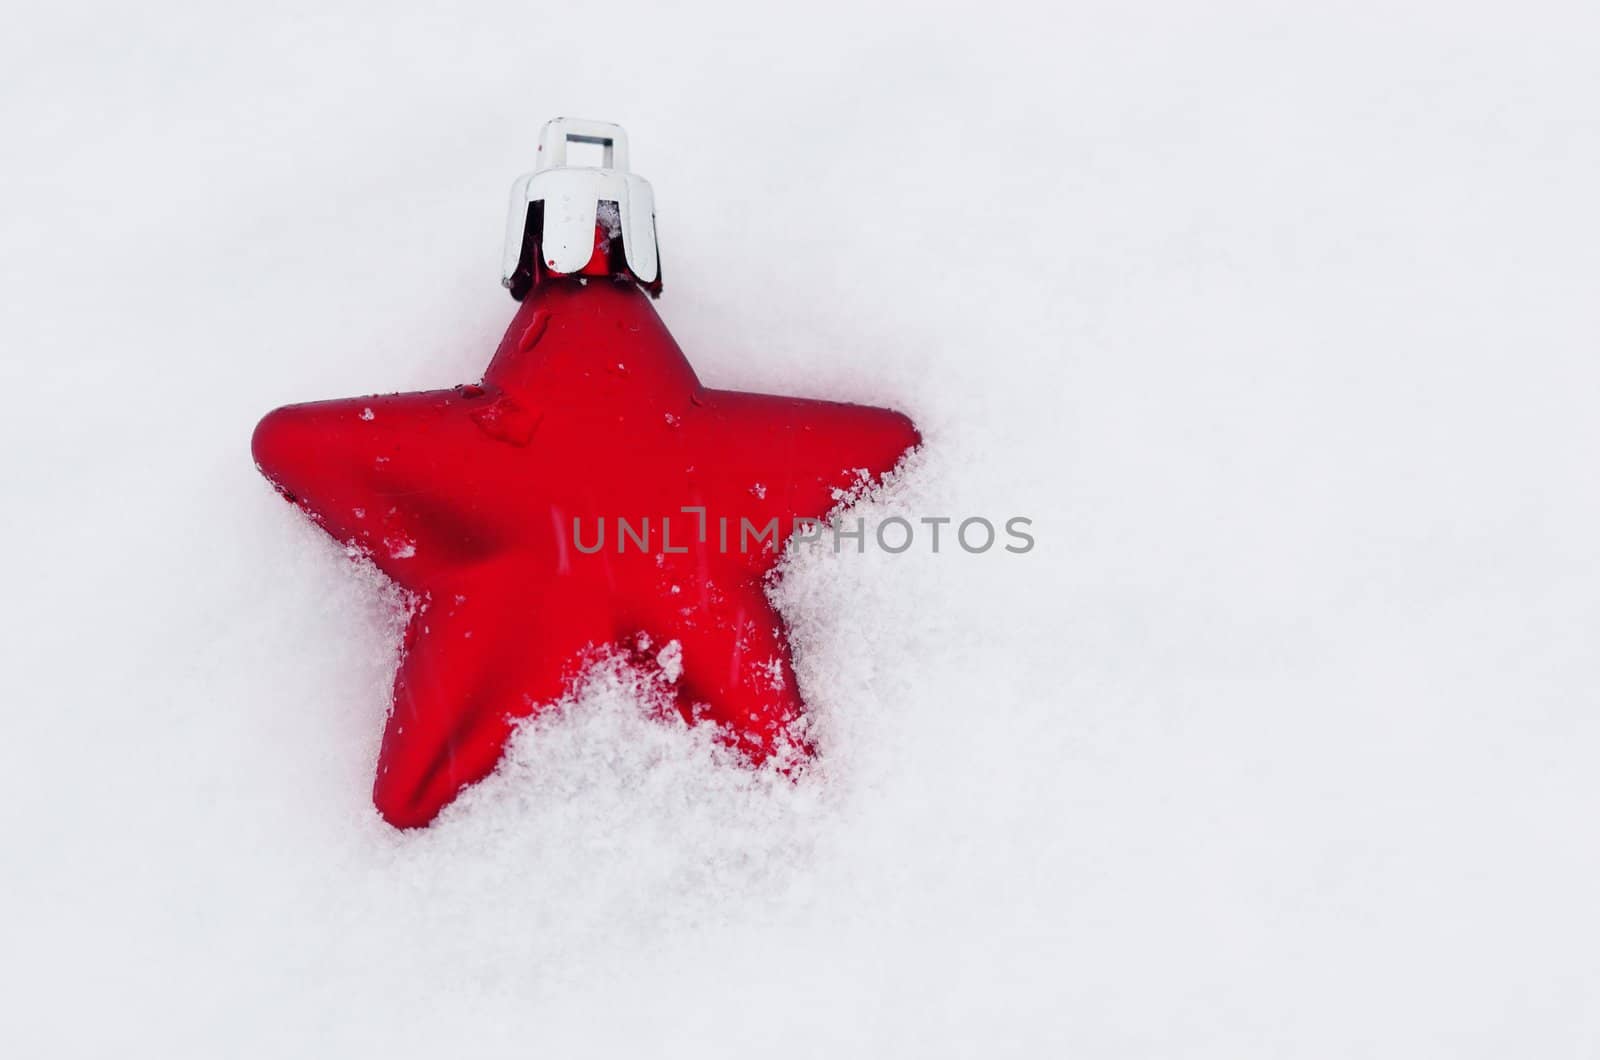 Christmas decoration outside in real snow during snowfall